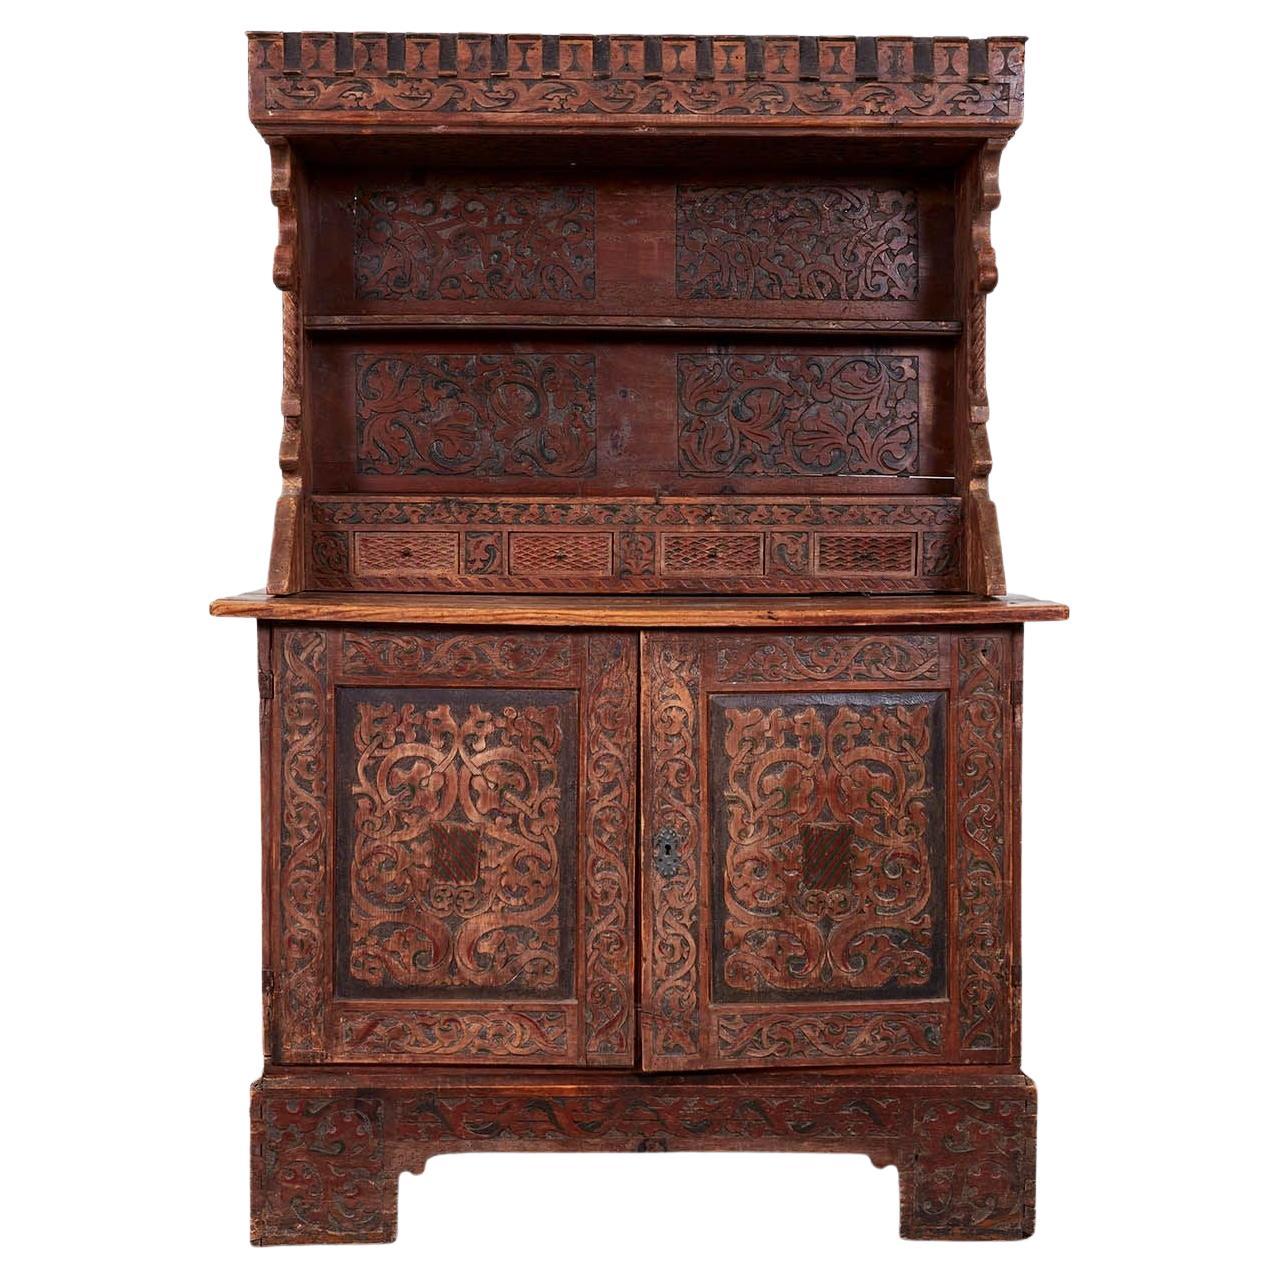 Rare Swiss Manorial Court Cupboard For Sale